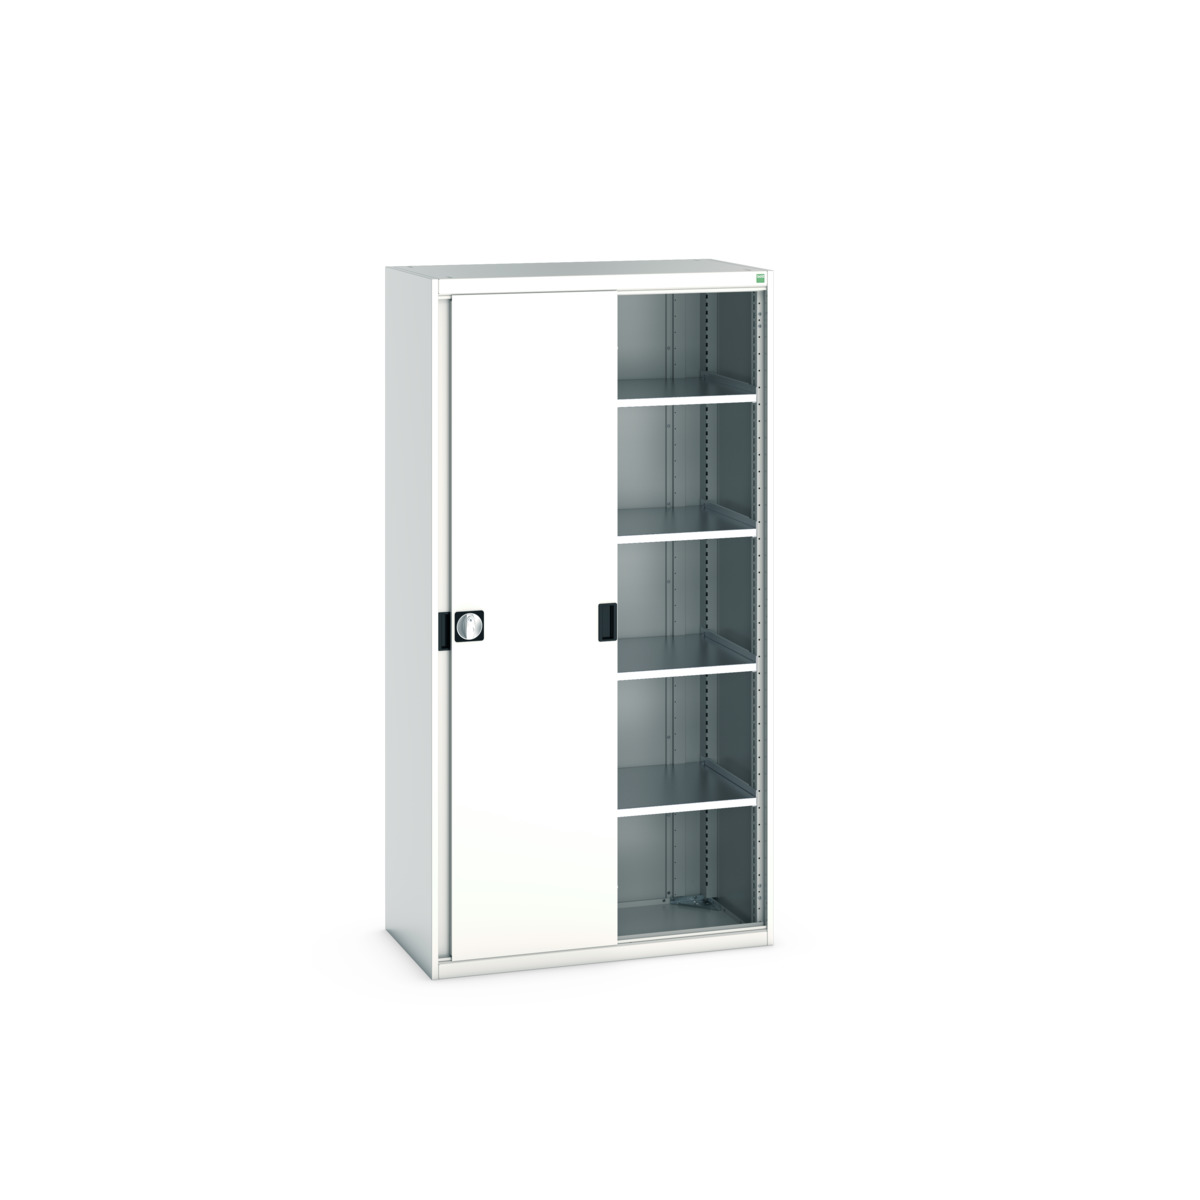 40013071.16V - Armoire Cubio SMS-10520-1.2